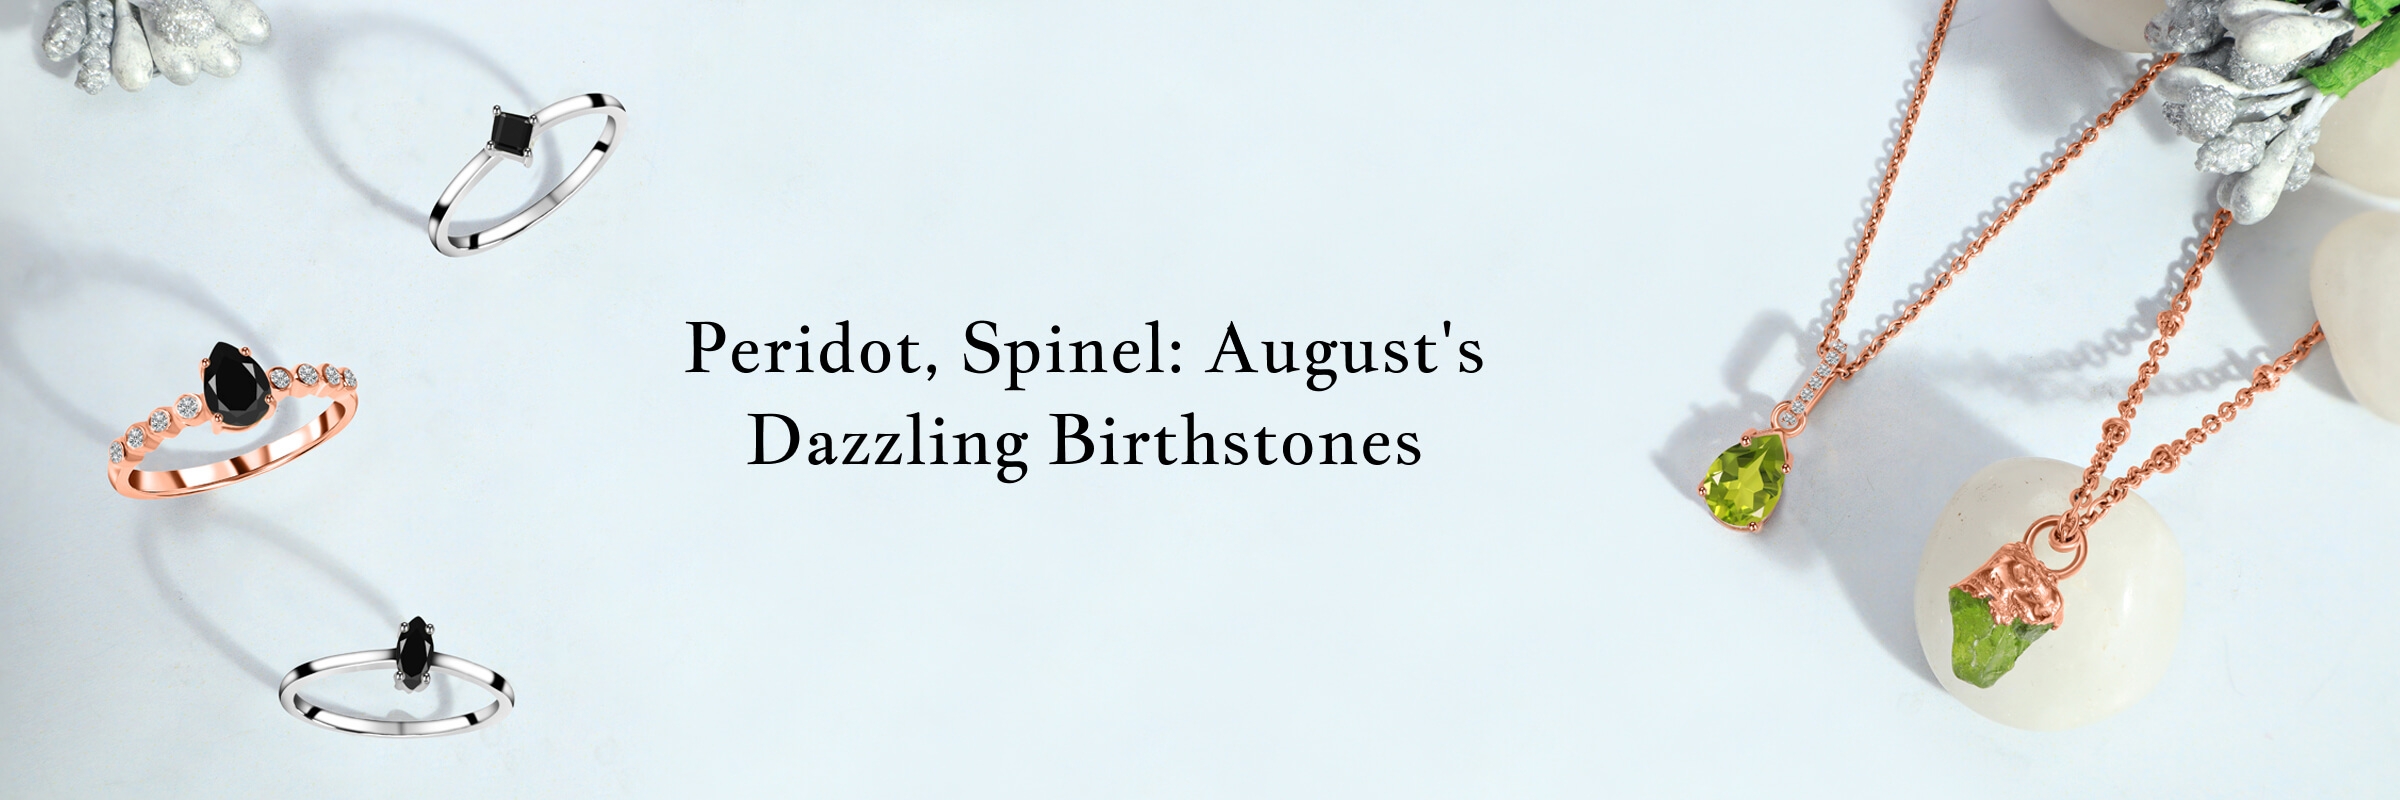 August Birthstones Peridot and Spinel